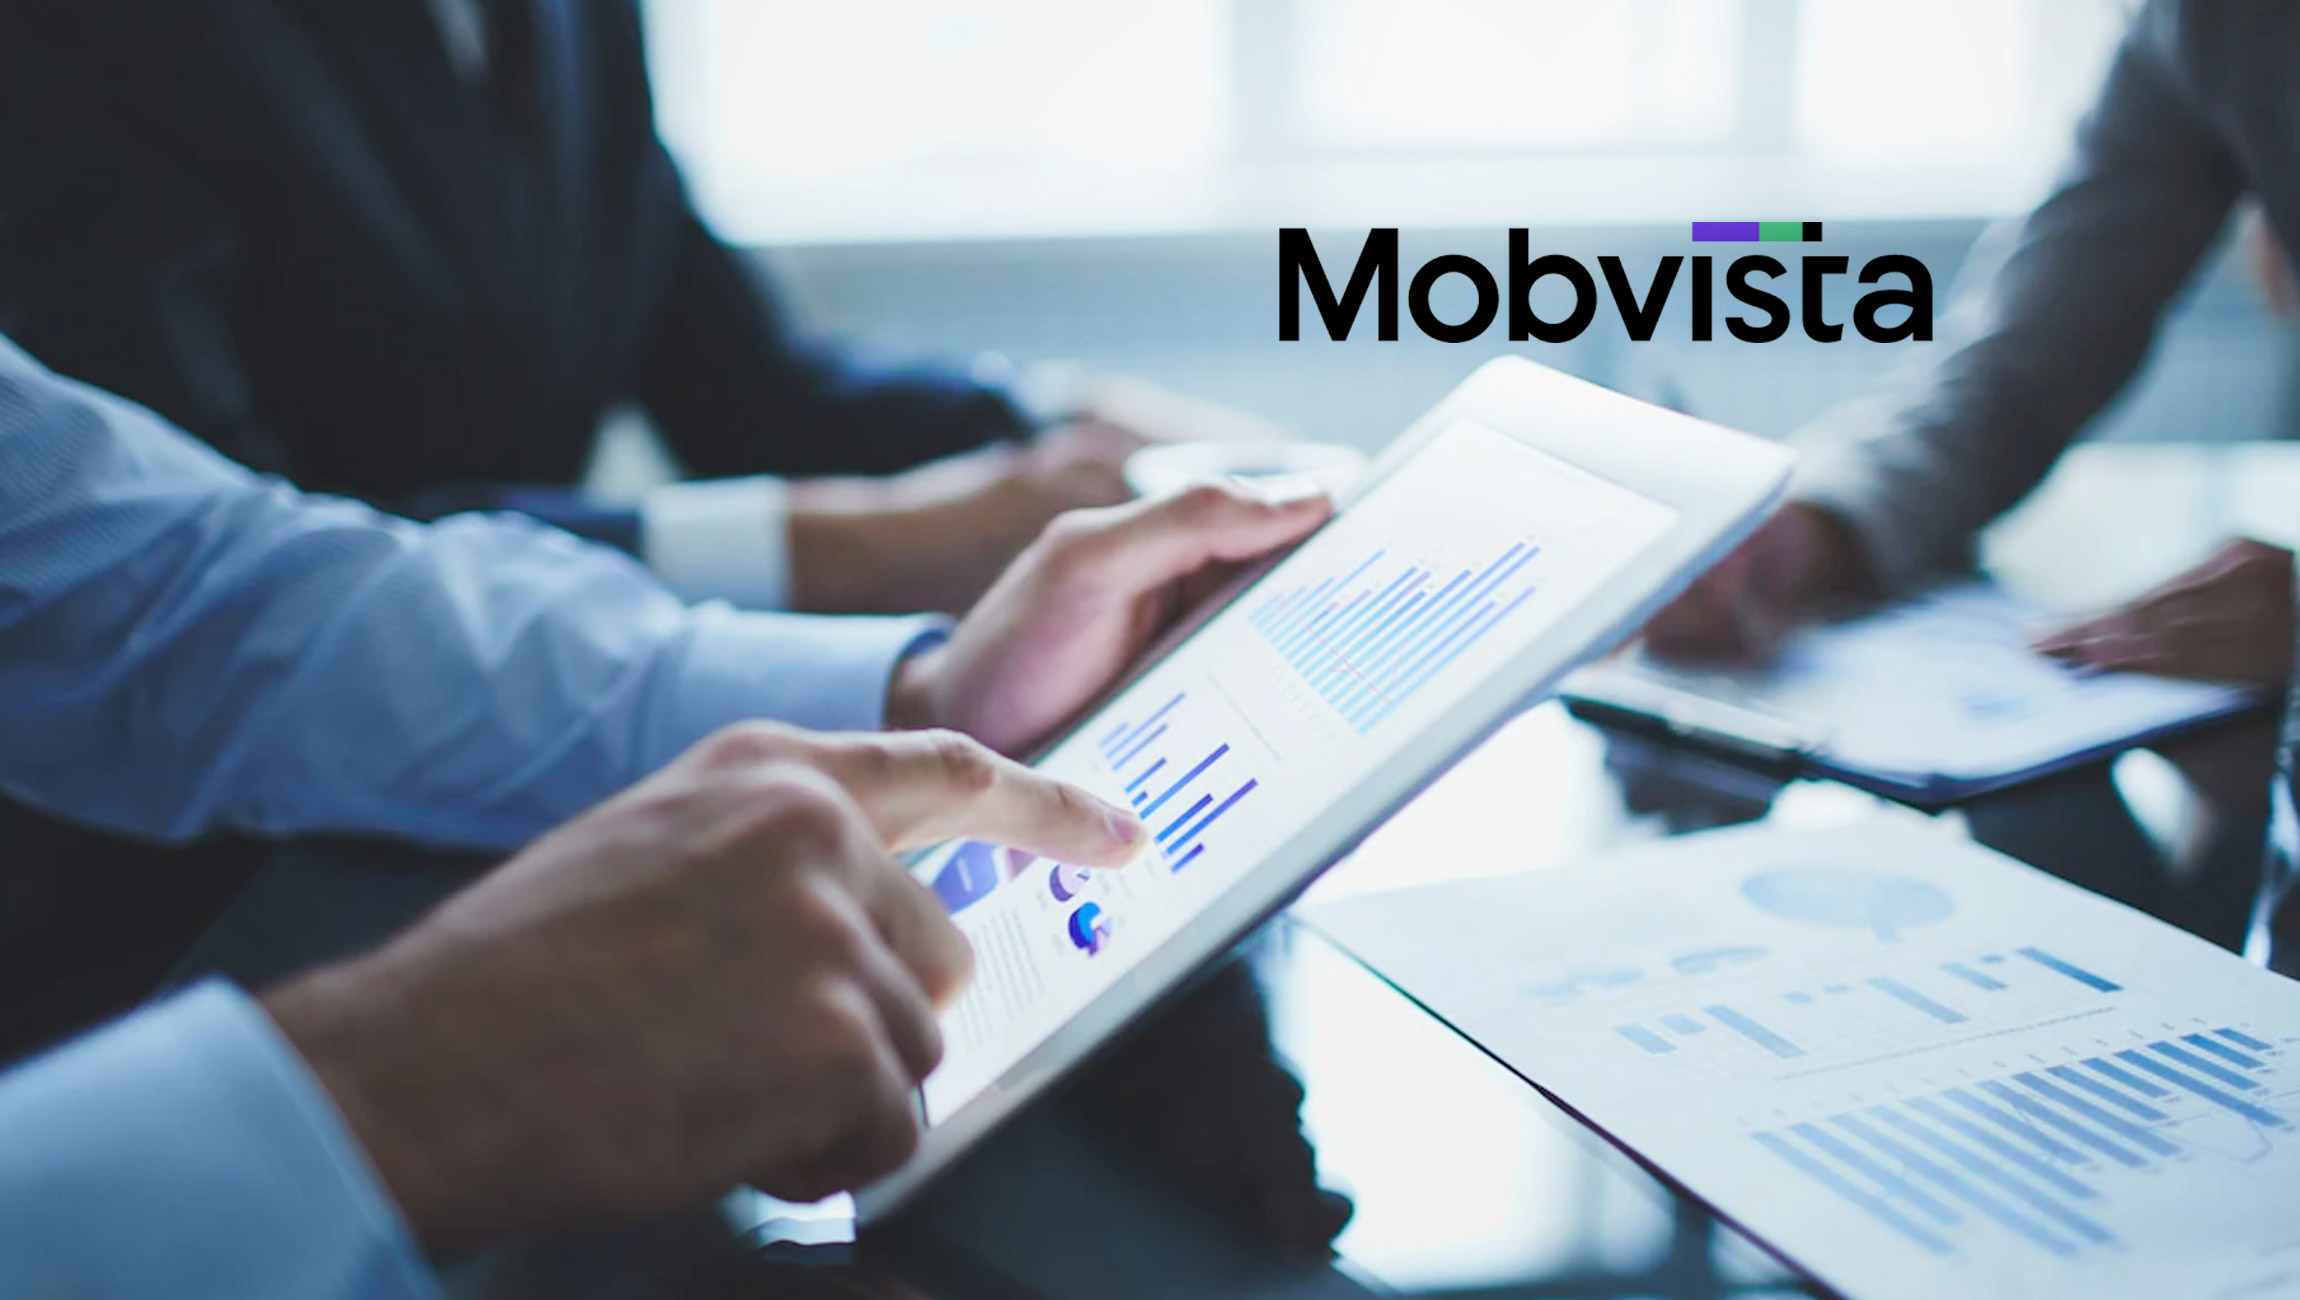 Mobvista Subsidiary, Mintegral, Reports Record-High Revenue in Q4 2022